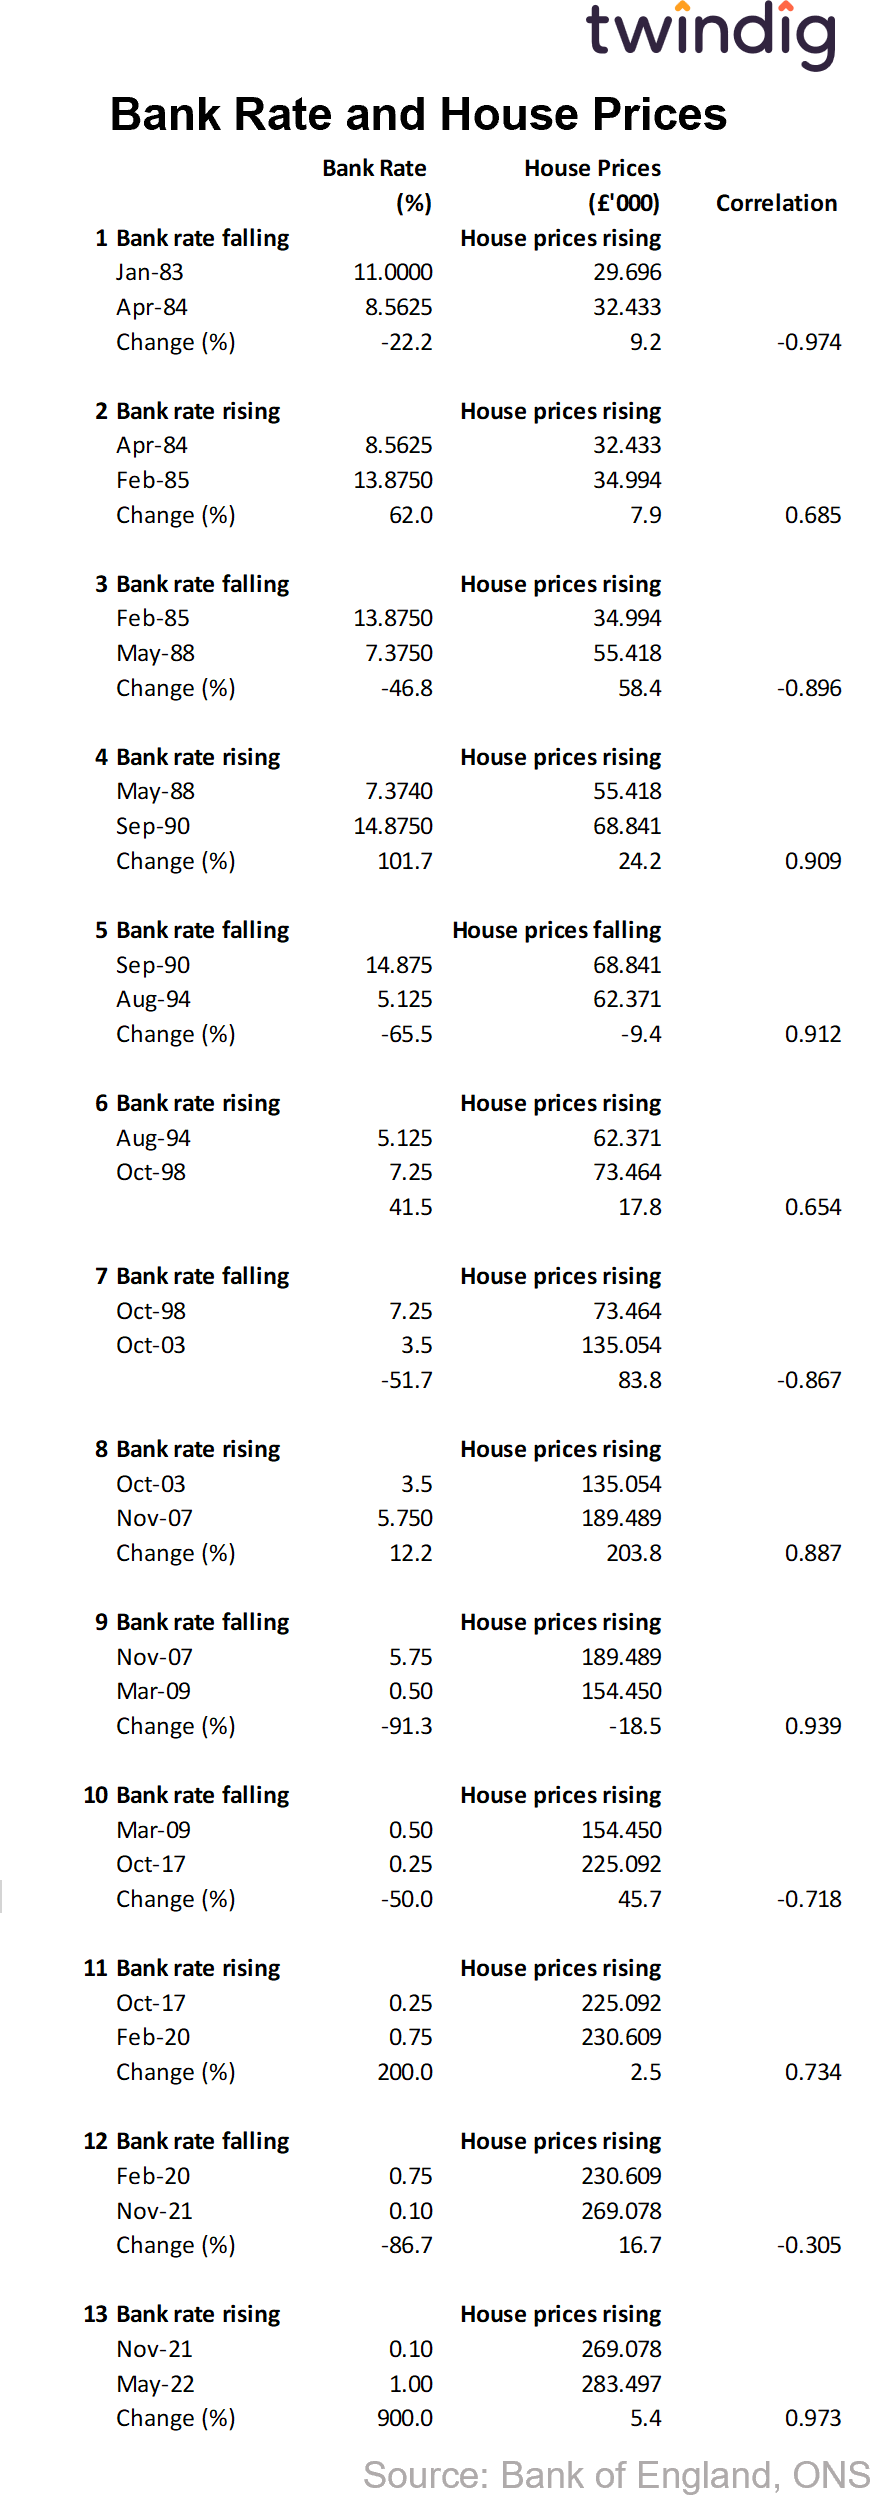 Table showing correlation interest rates and house prices 1983 to 2022